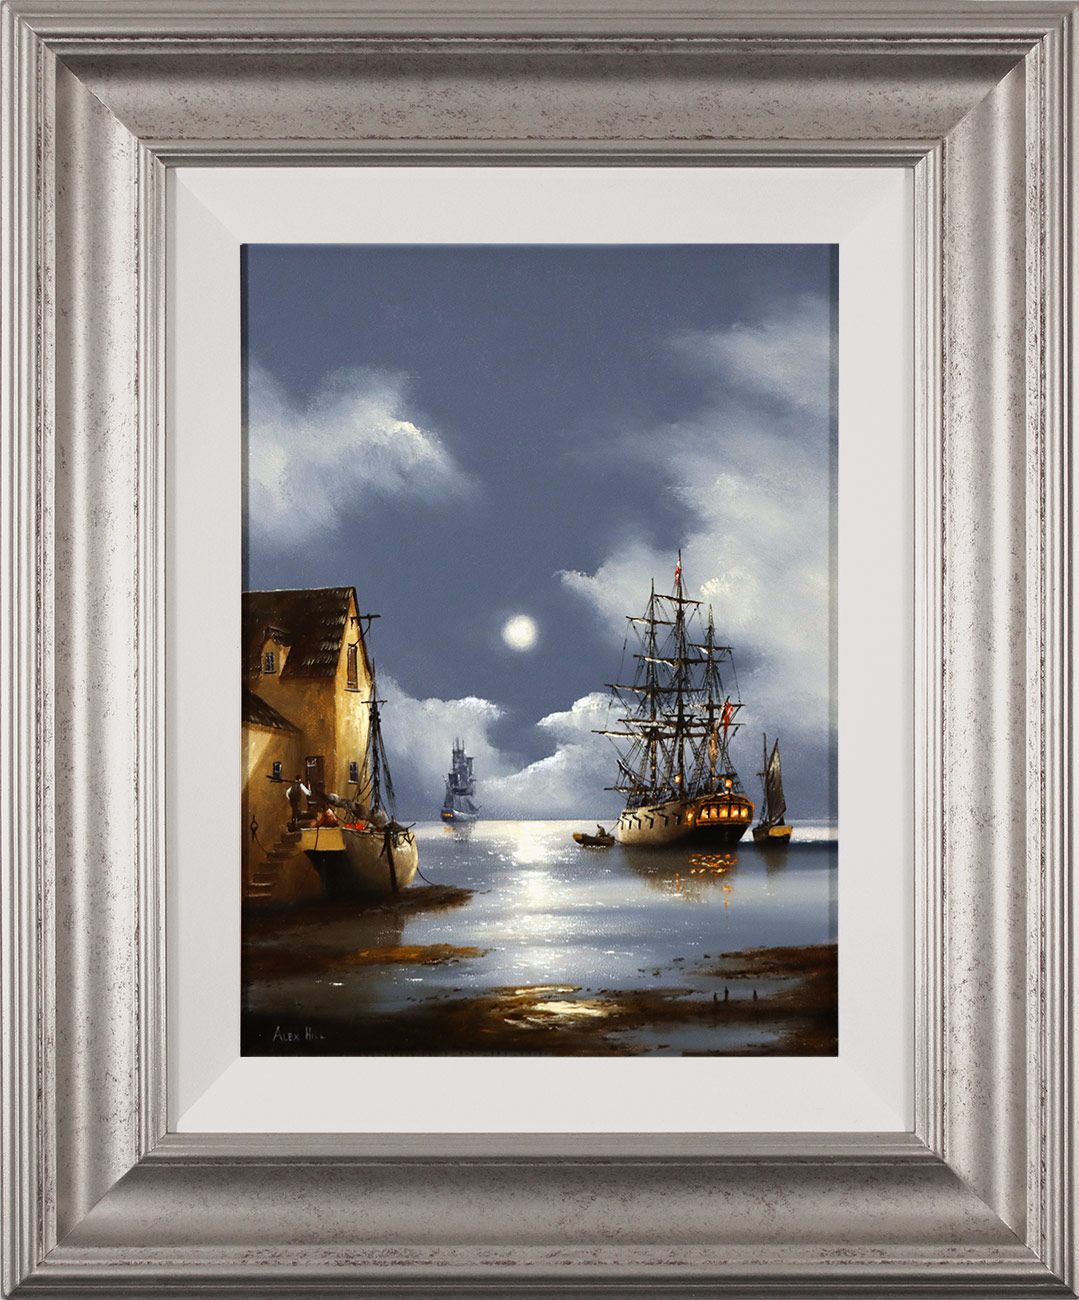 Alex Hill, Original oil painting on panel, Moonlight Harbour Click to enlarge